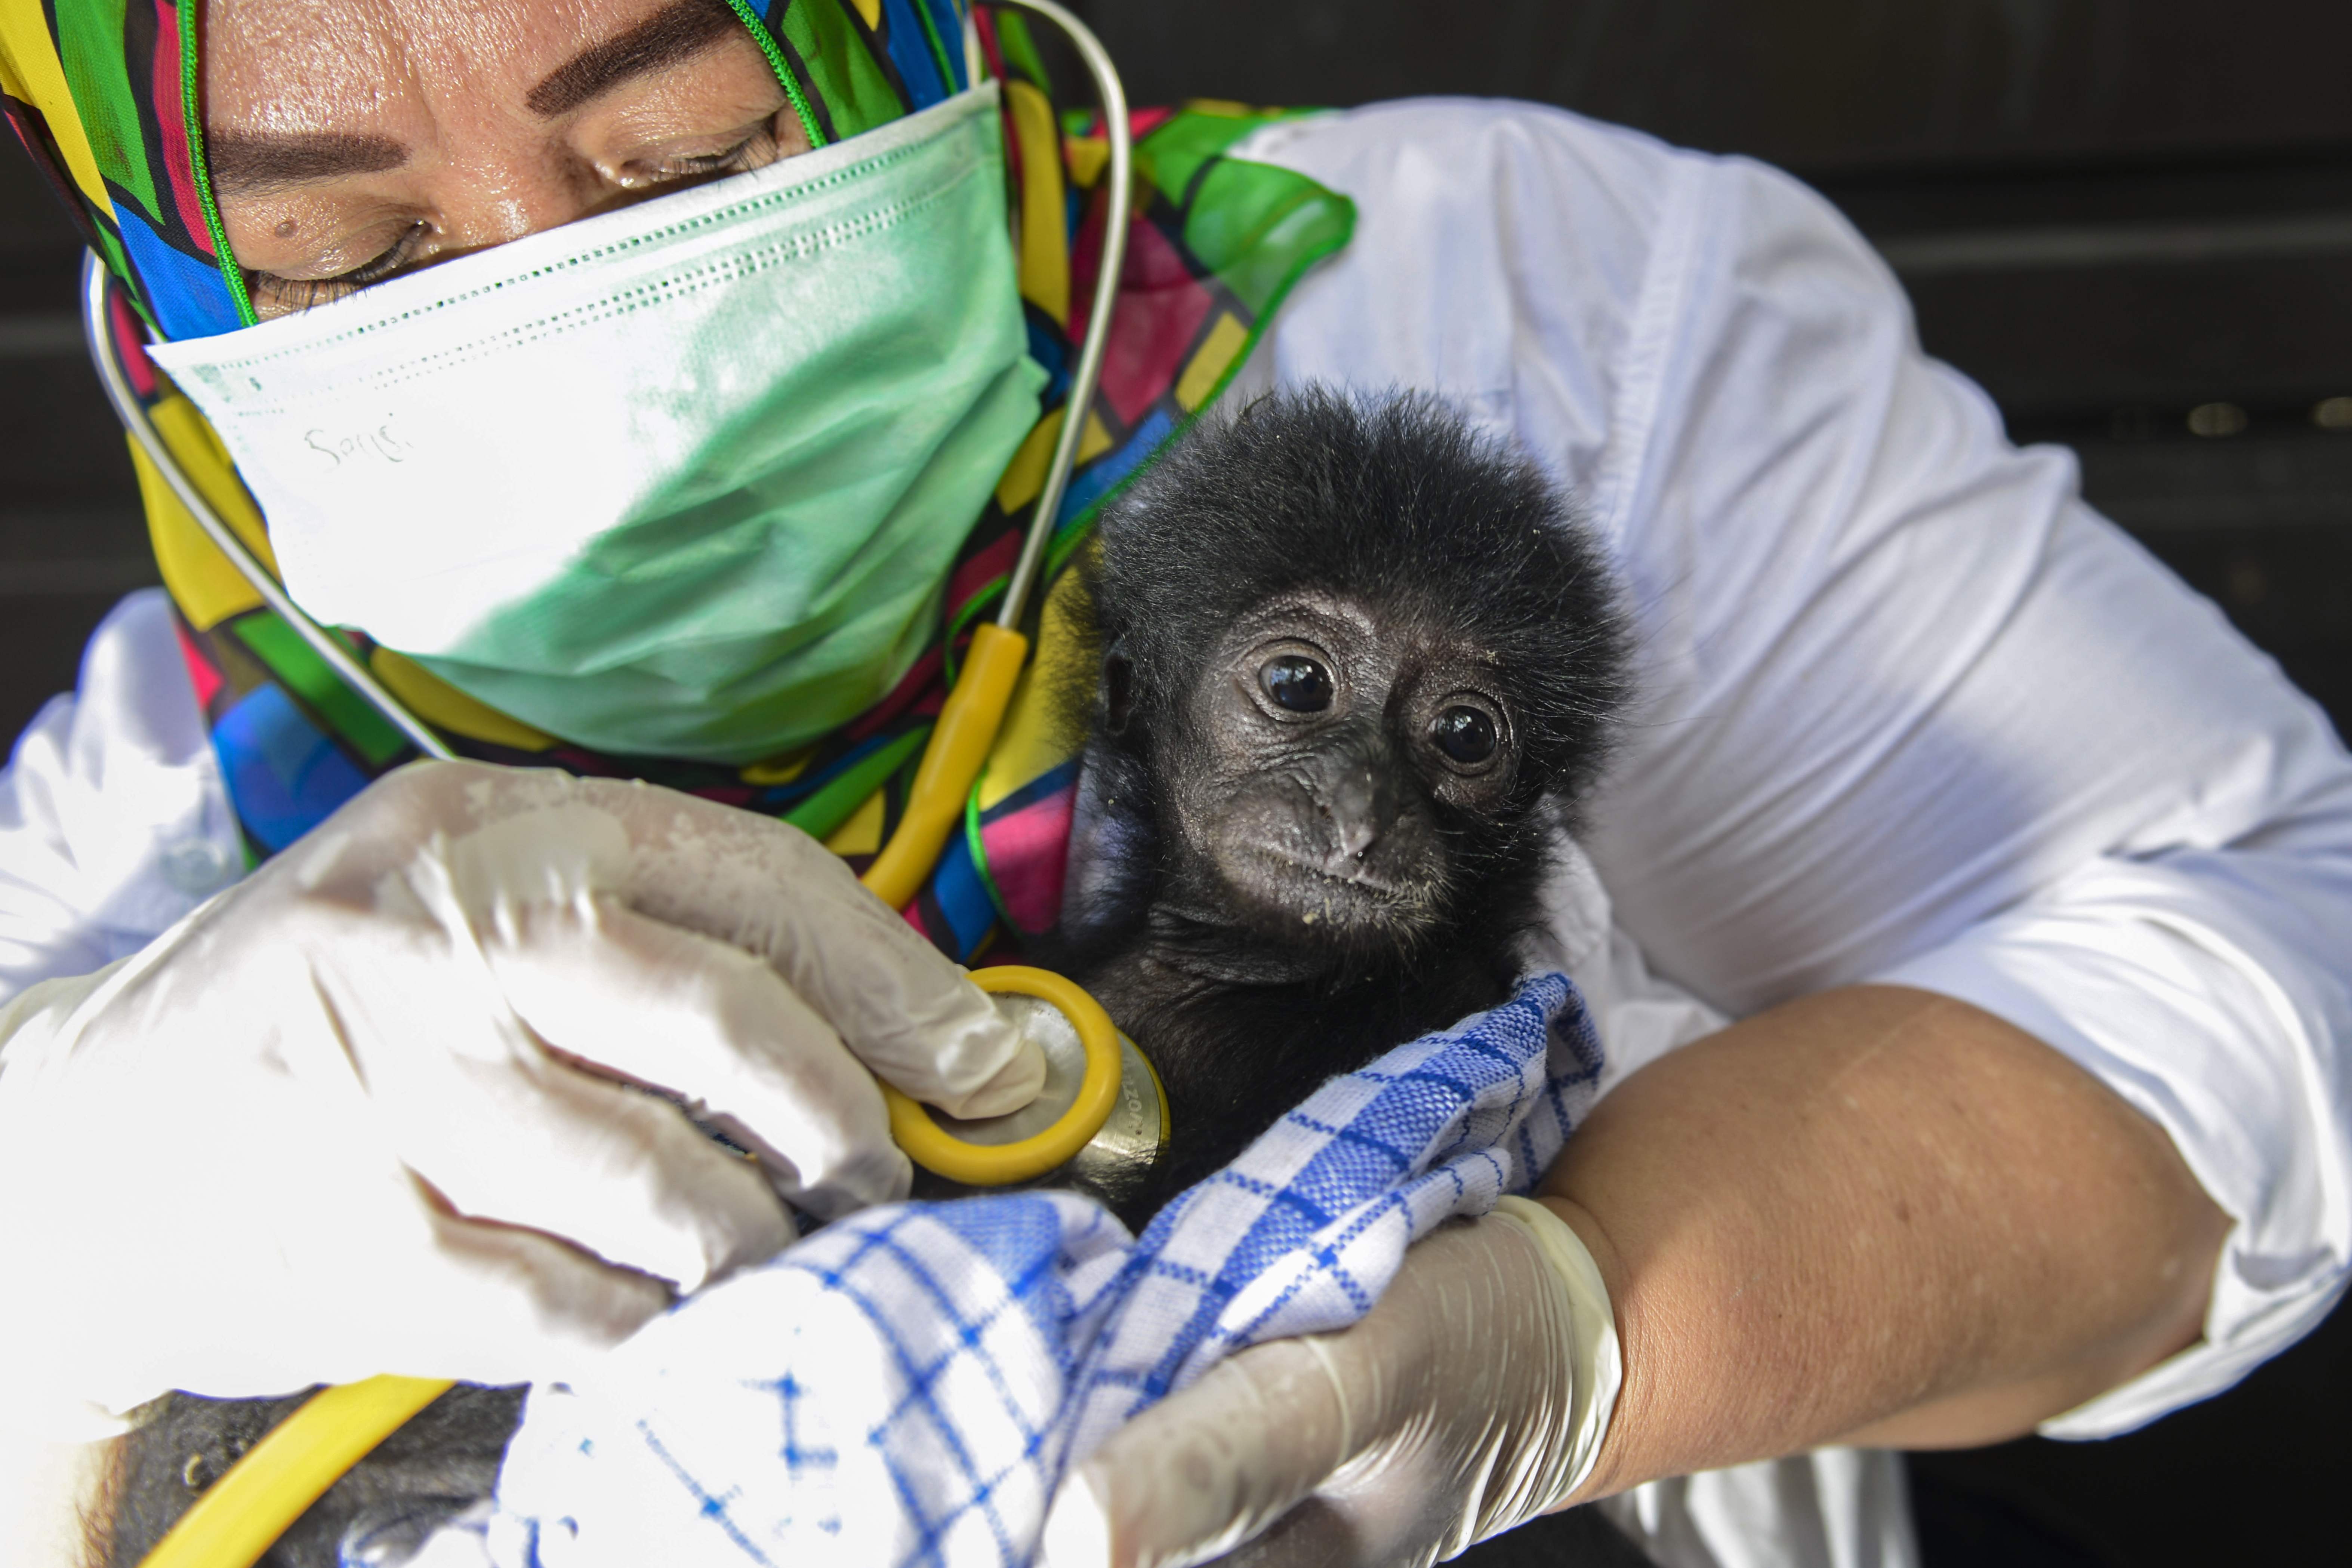 A veterinarian tends to a rescued baby black gibbon at a local nature conservation agency's office in Banda Aceh, Aceh province on Sept. 13, 2018. A local nature conservation agency seized the two month-old siamang, or black-furred gibbon, from a vil